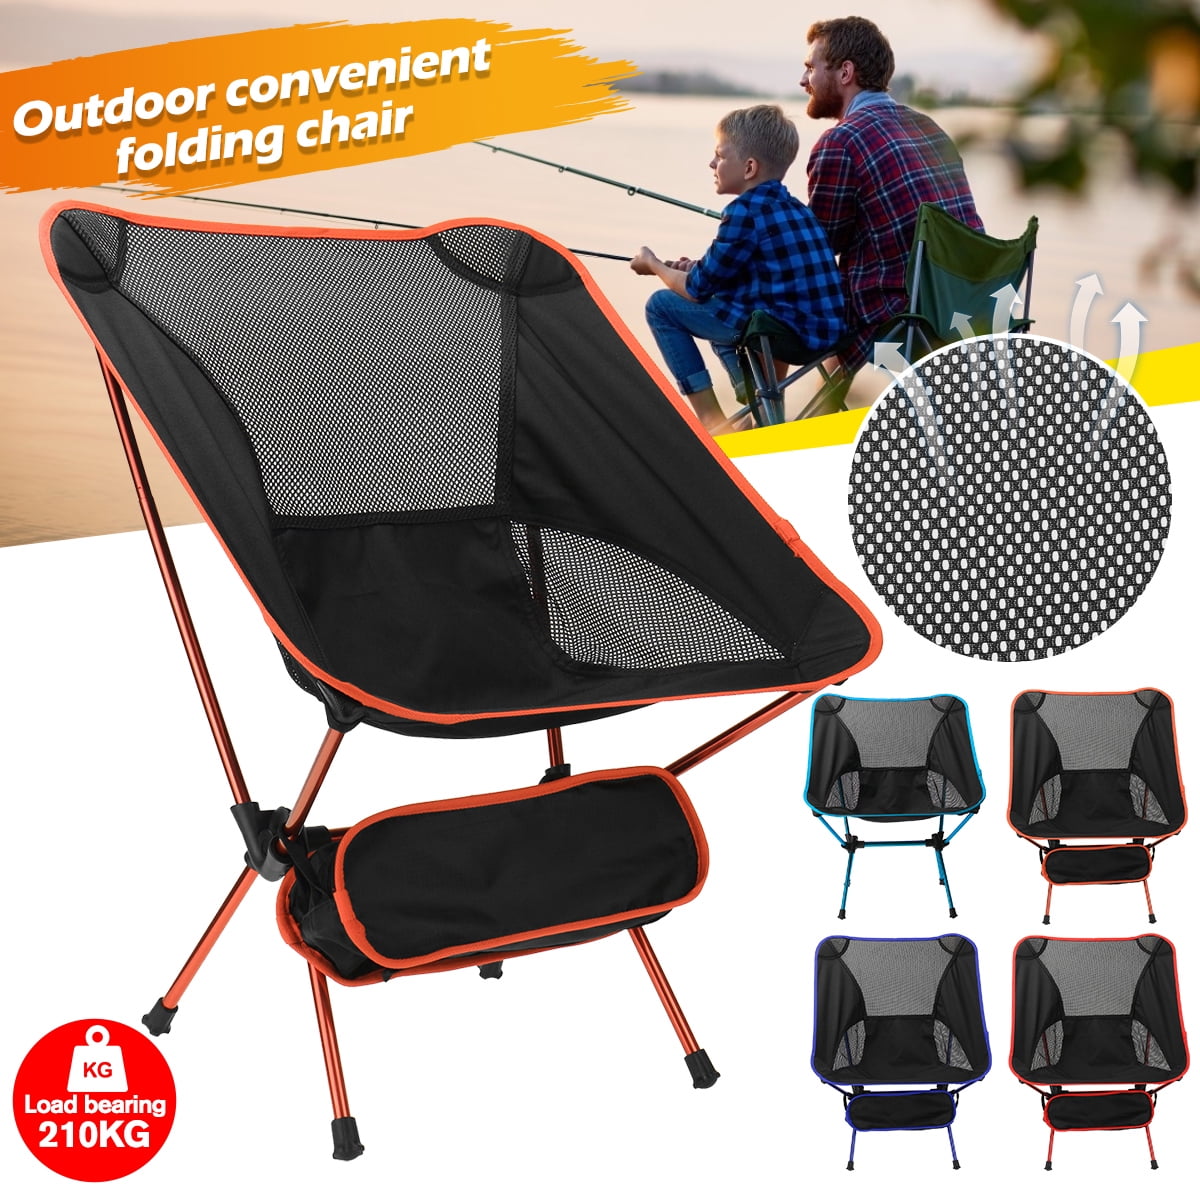 Ultralight Detachable Portable Folding Backpacking Camping Chair with StorageBag 